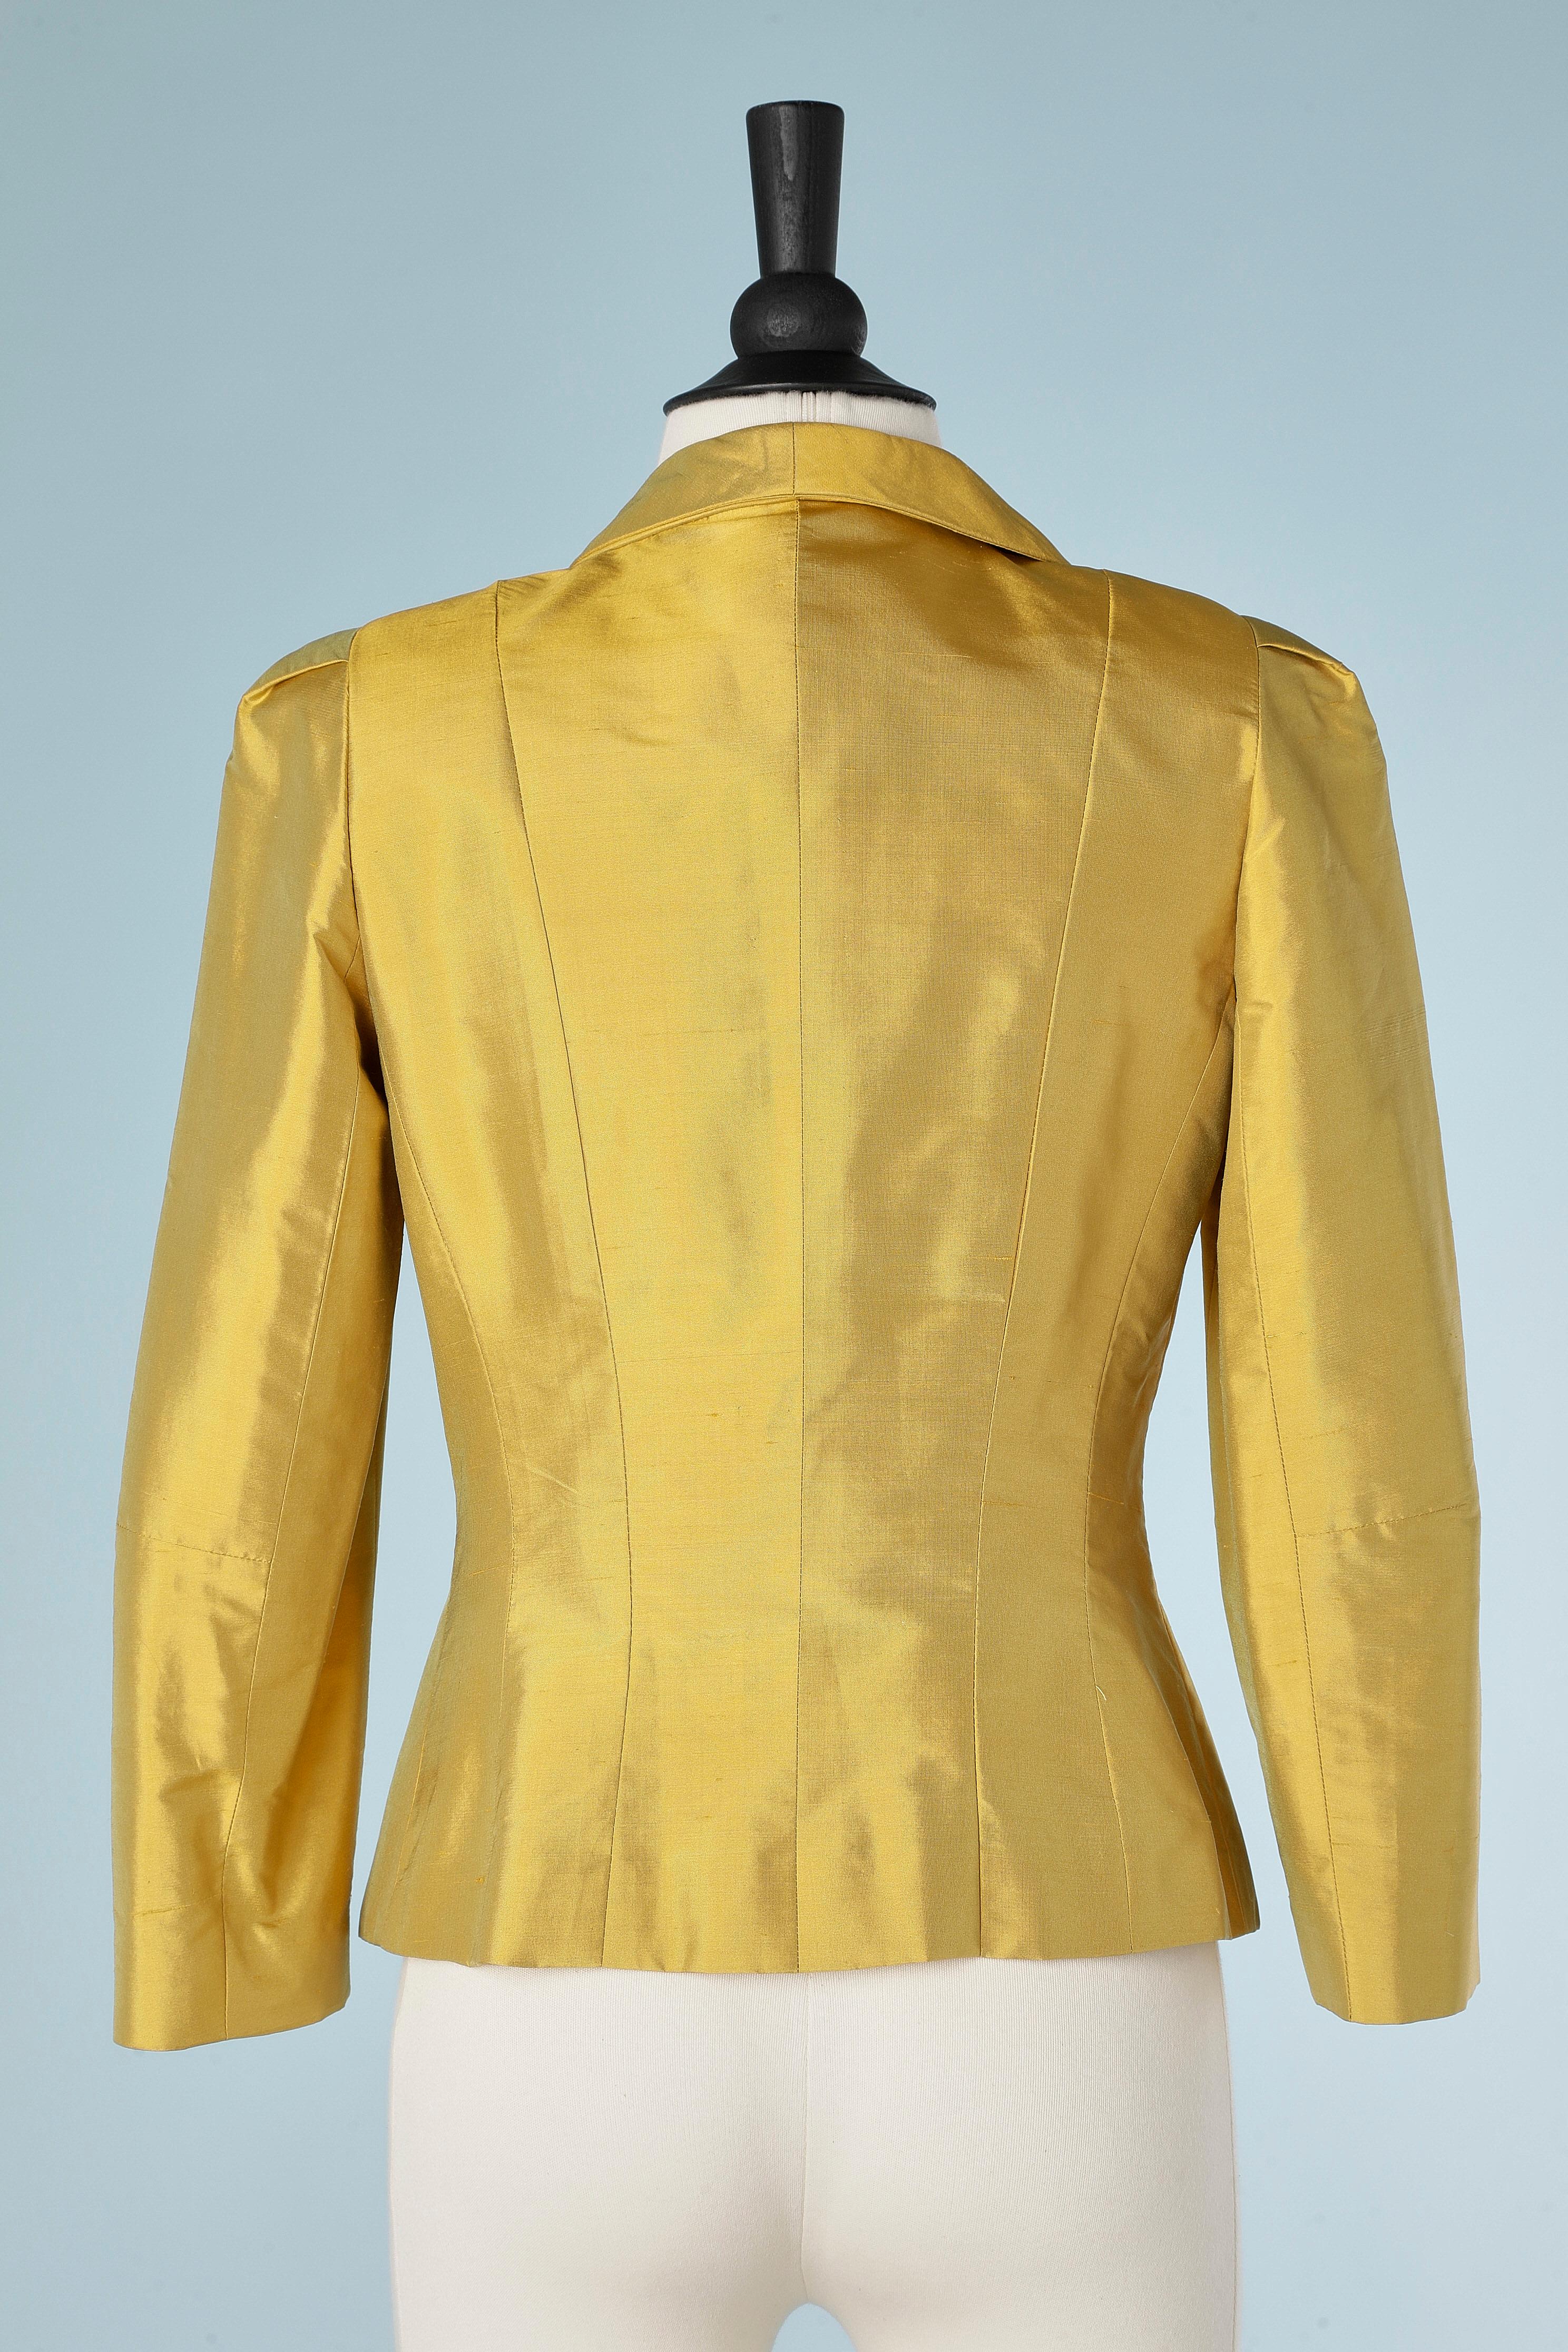 Yellow raw silk cocktail jacket with bow on pocket and collar Luisa Spagnoli  For Sale 1